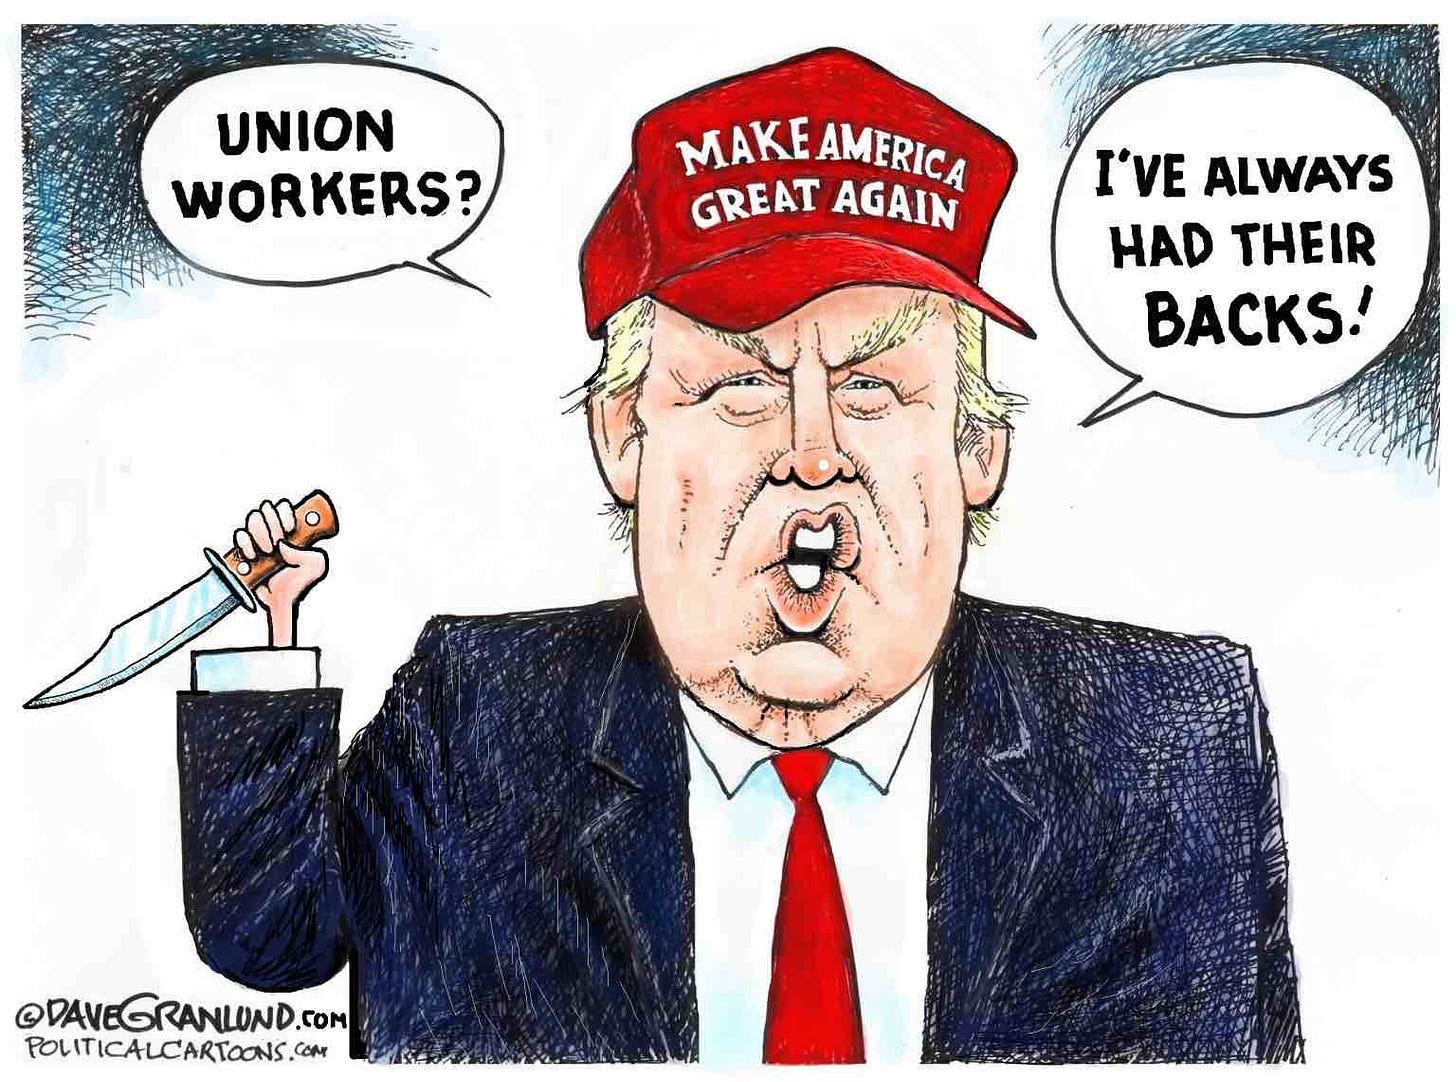 Trump works for his rich donors not working Americans and union members.